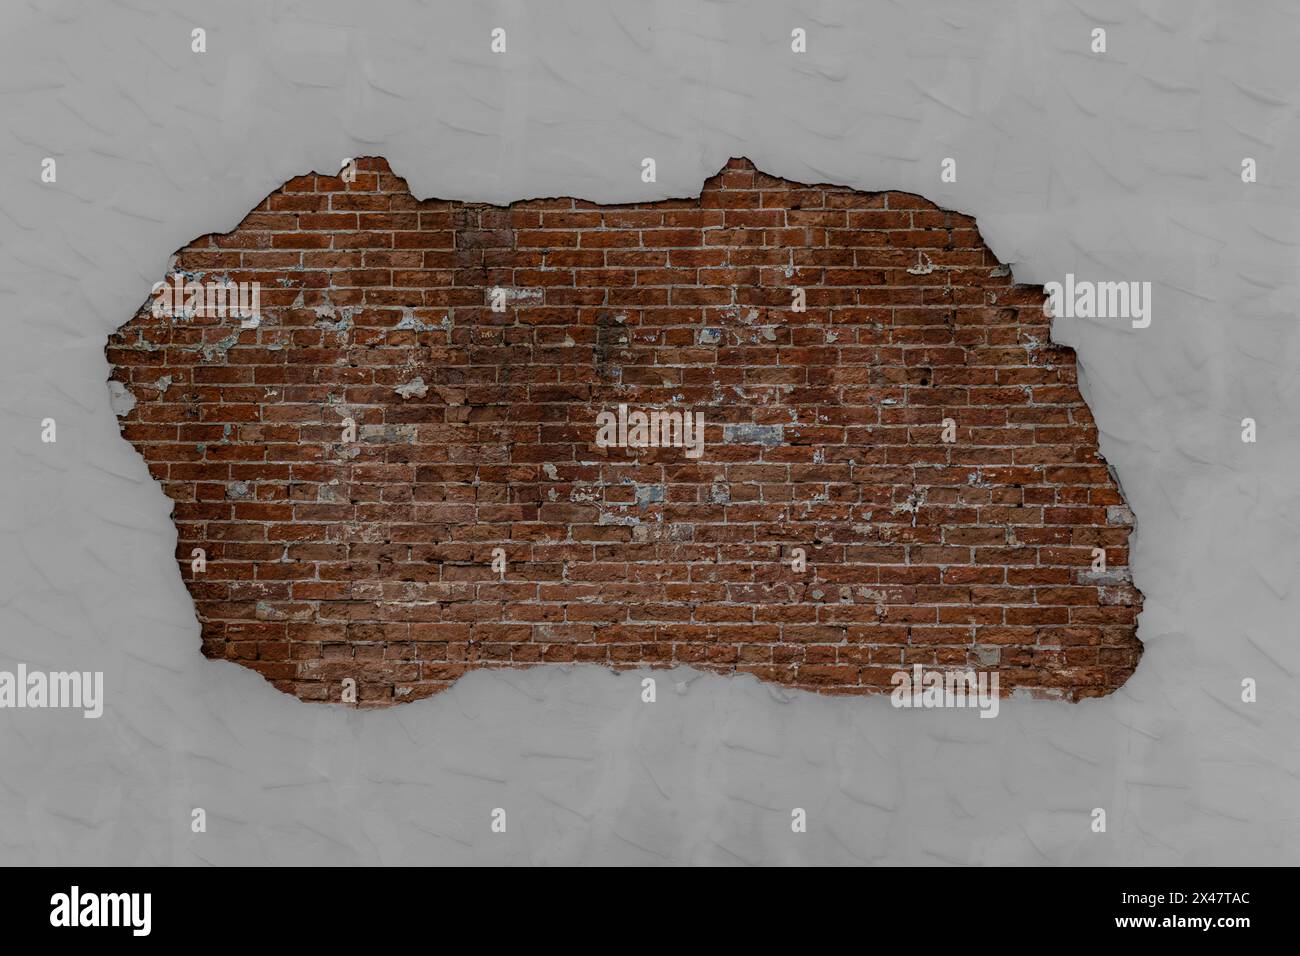 Background peeling away to reveal textured brick wall Stock Photo